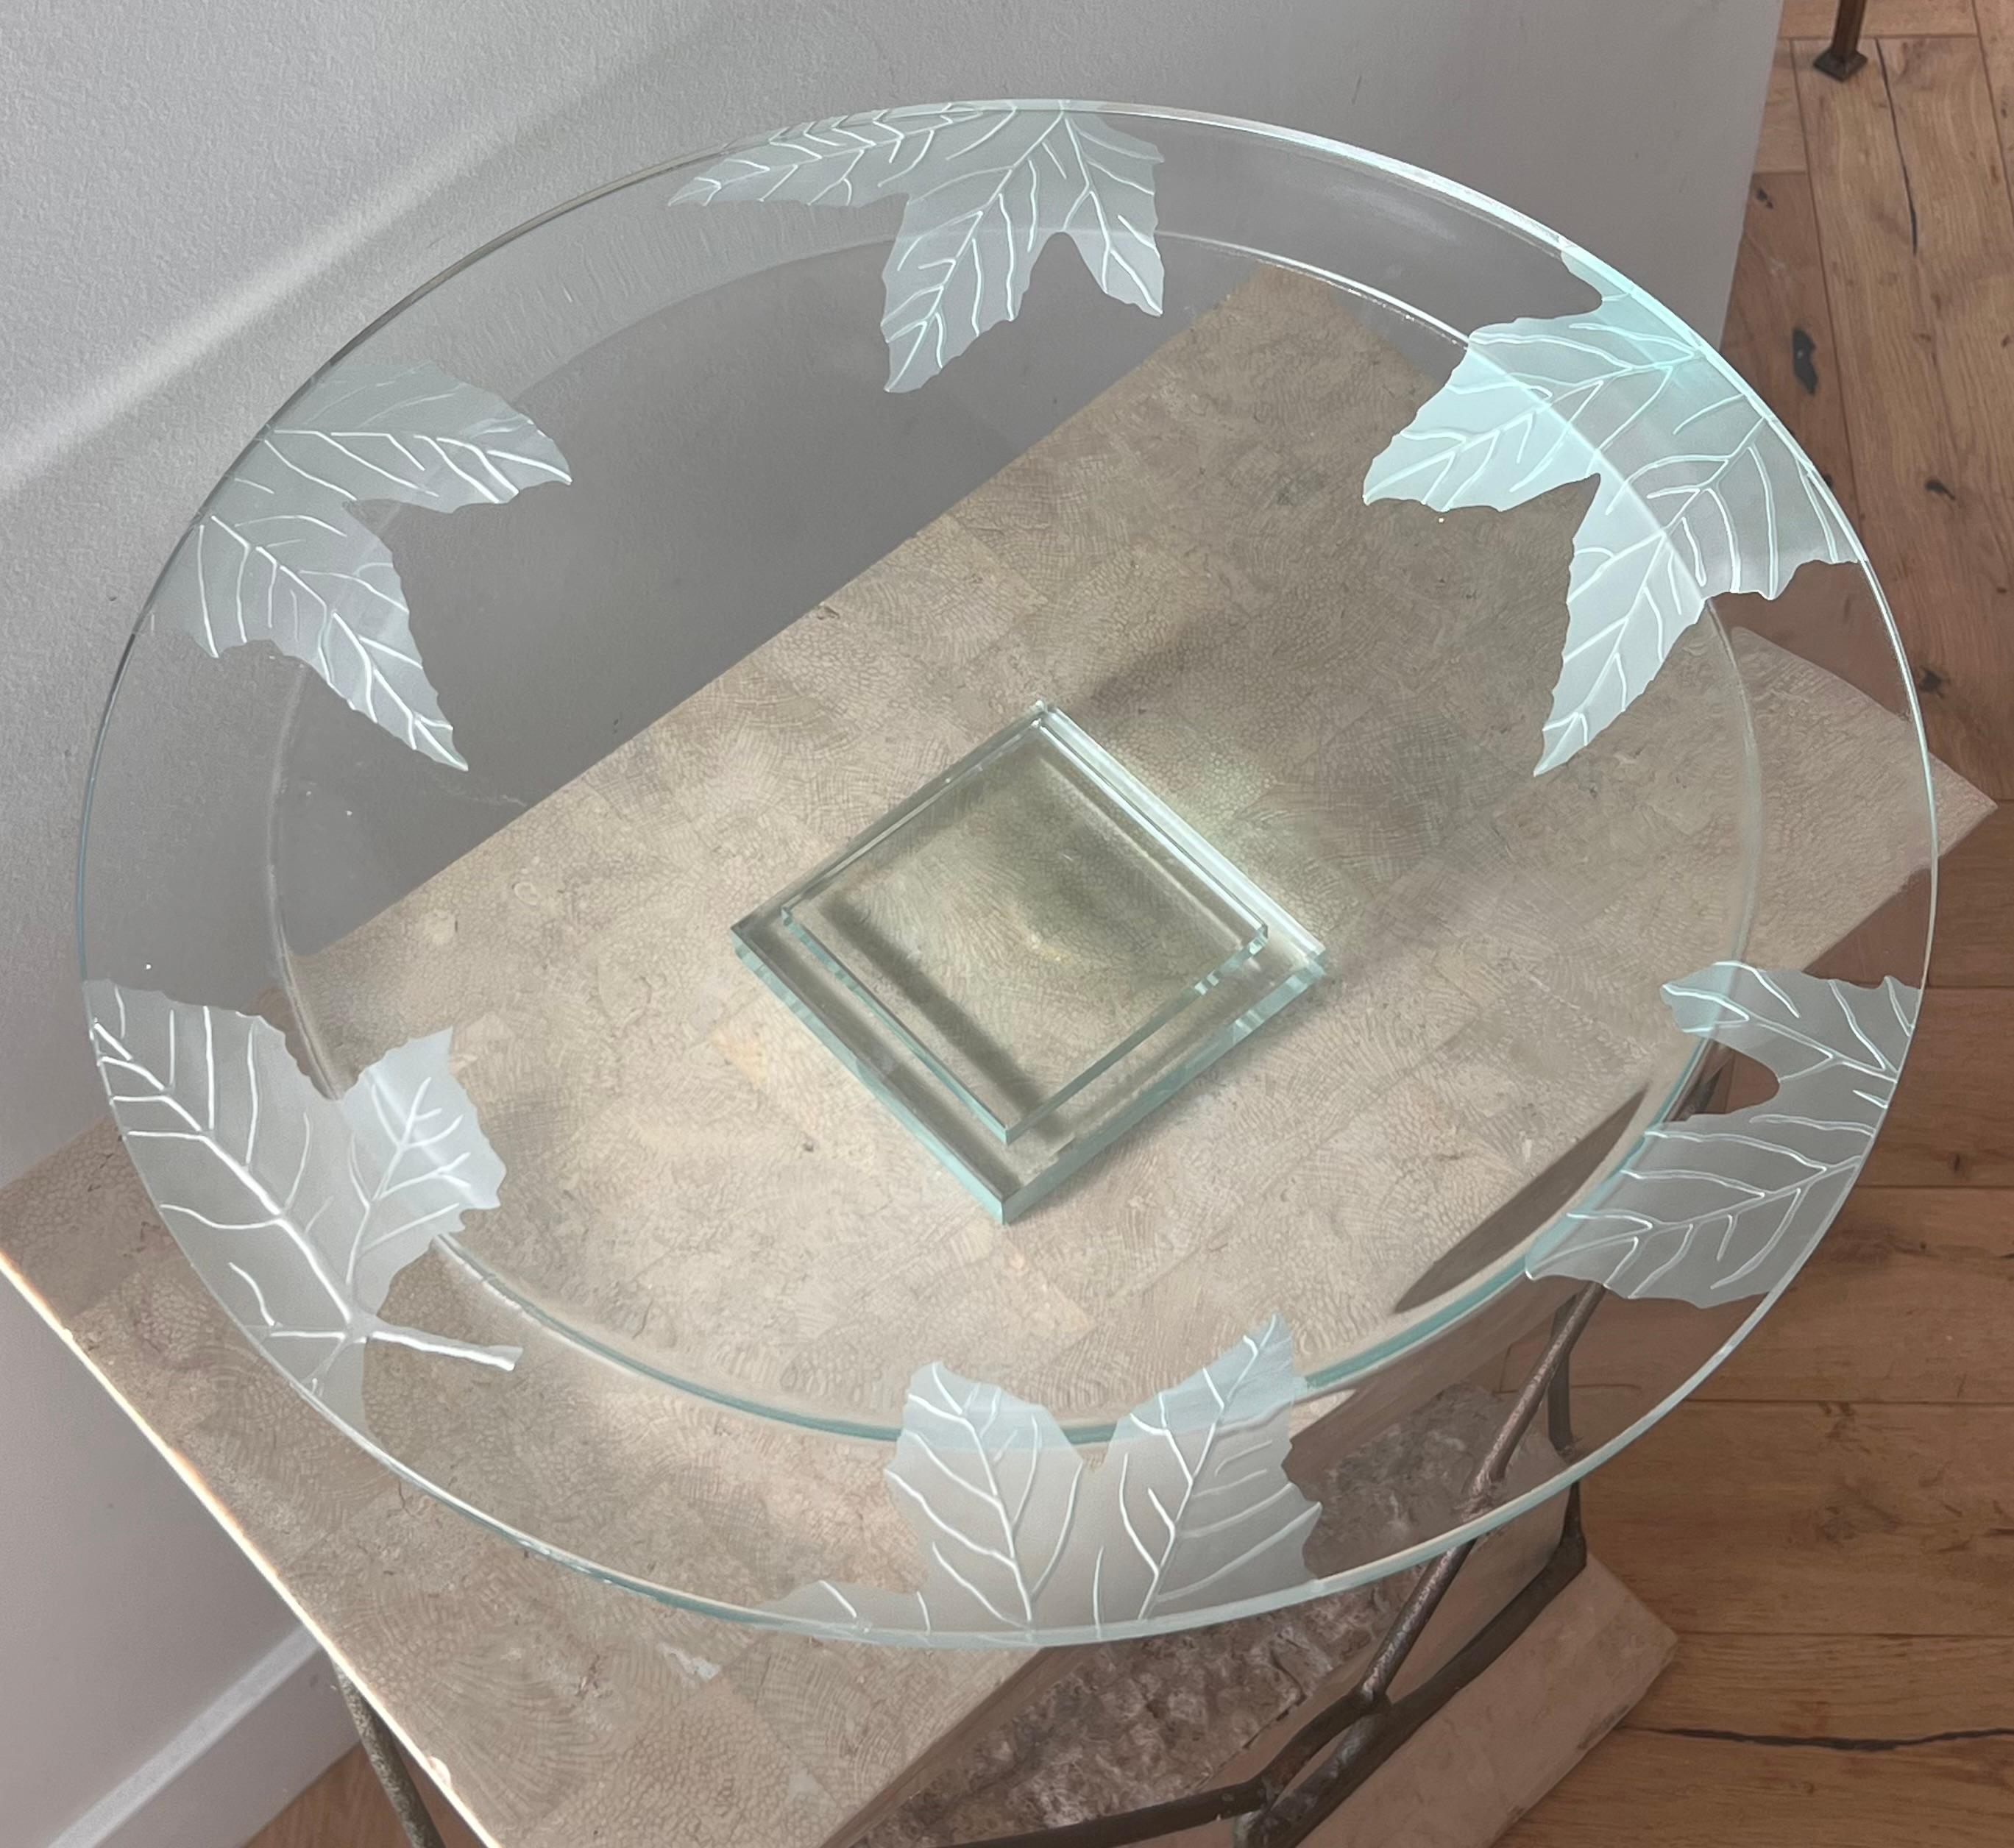 A huge, monumental studio art glass centerpiece platter with etched leaves by Stephen Schlanser, 21st century. A large thick glass dish is etched with an intricate leaf motif, and layered upon geometrically intriguing stacked glass blocks. It is